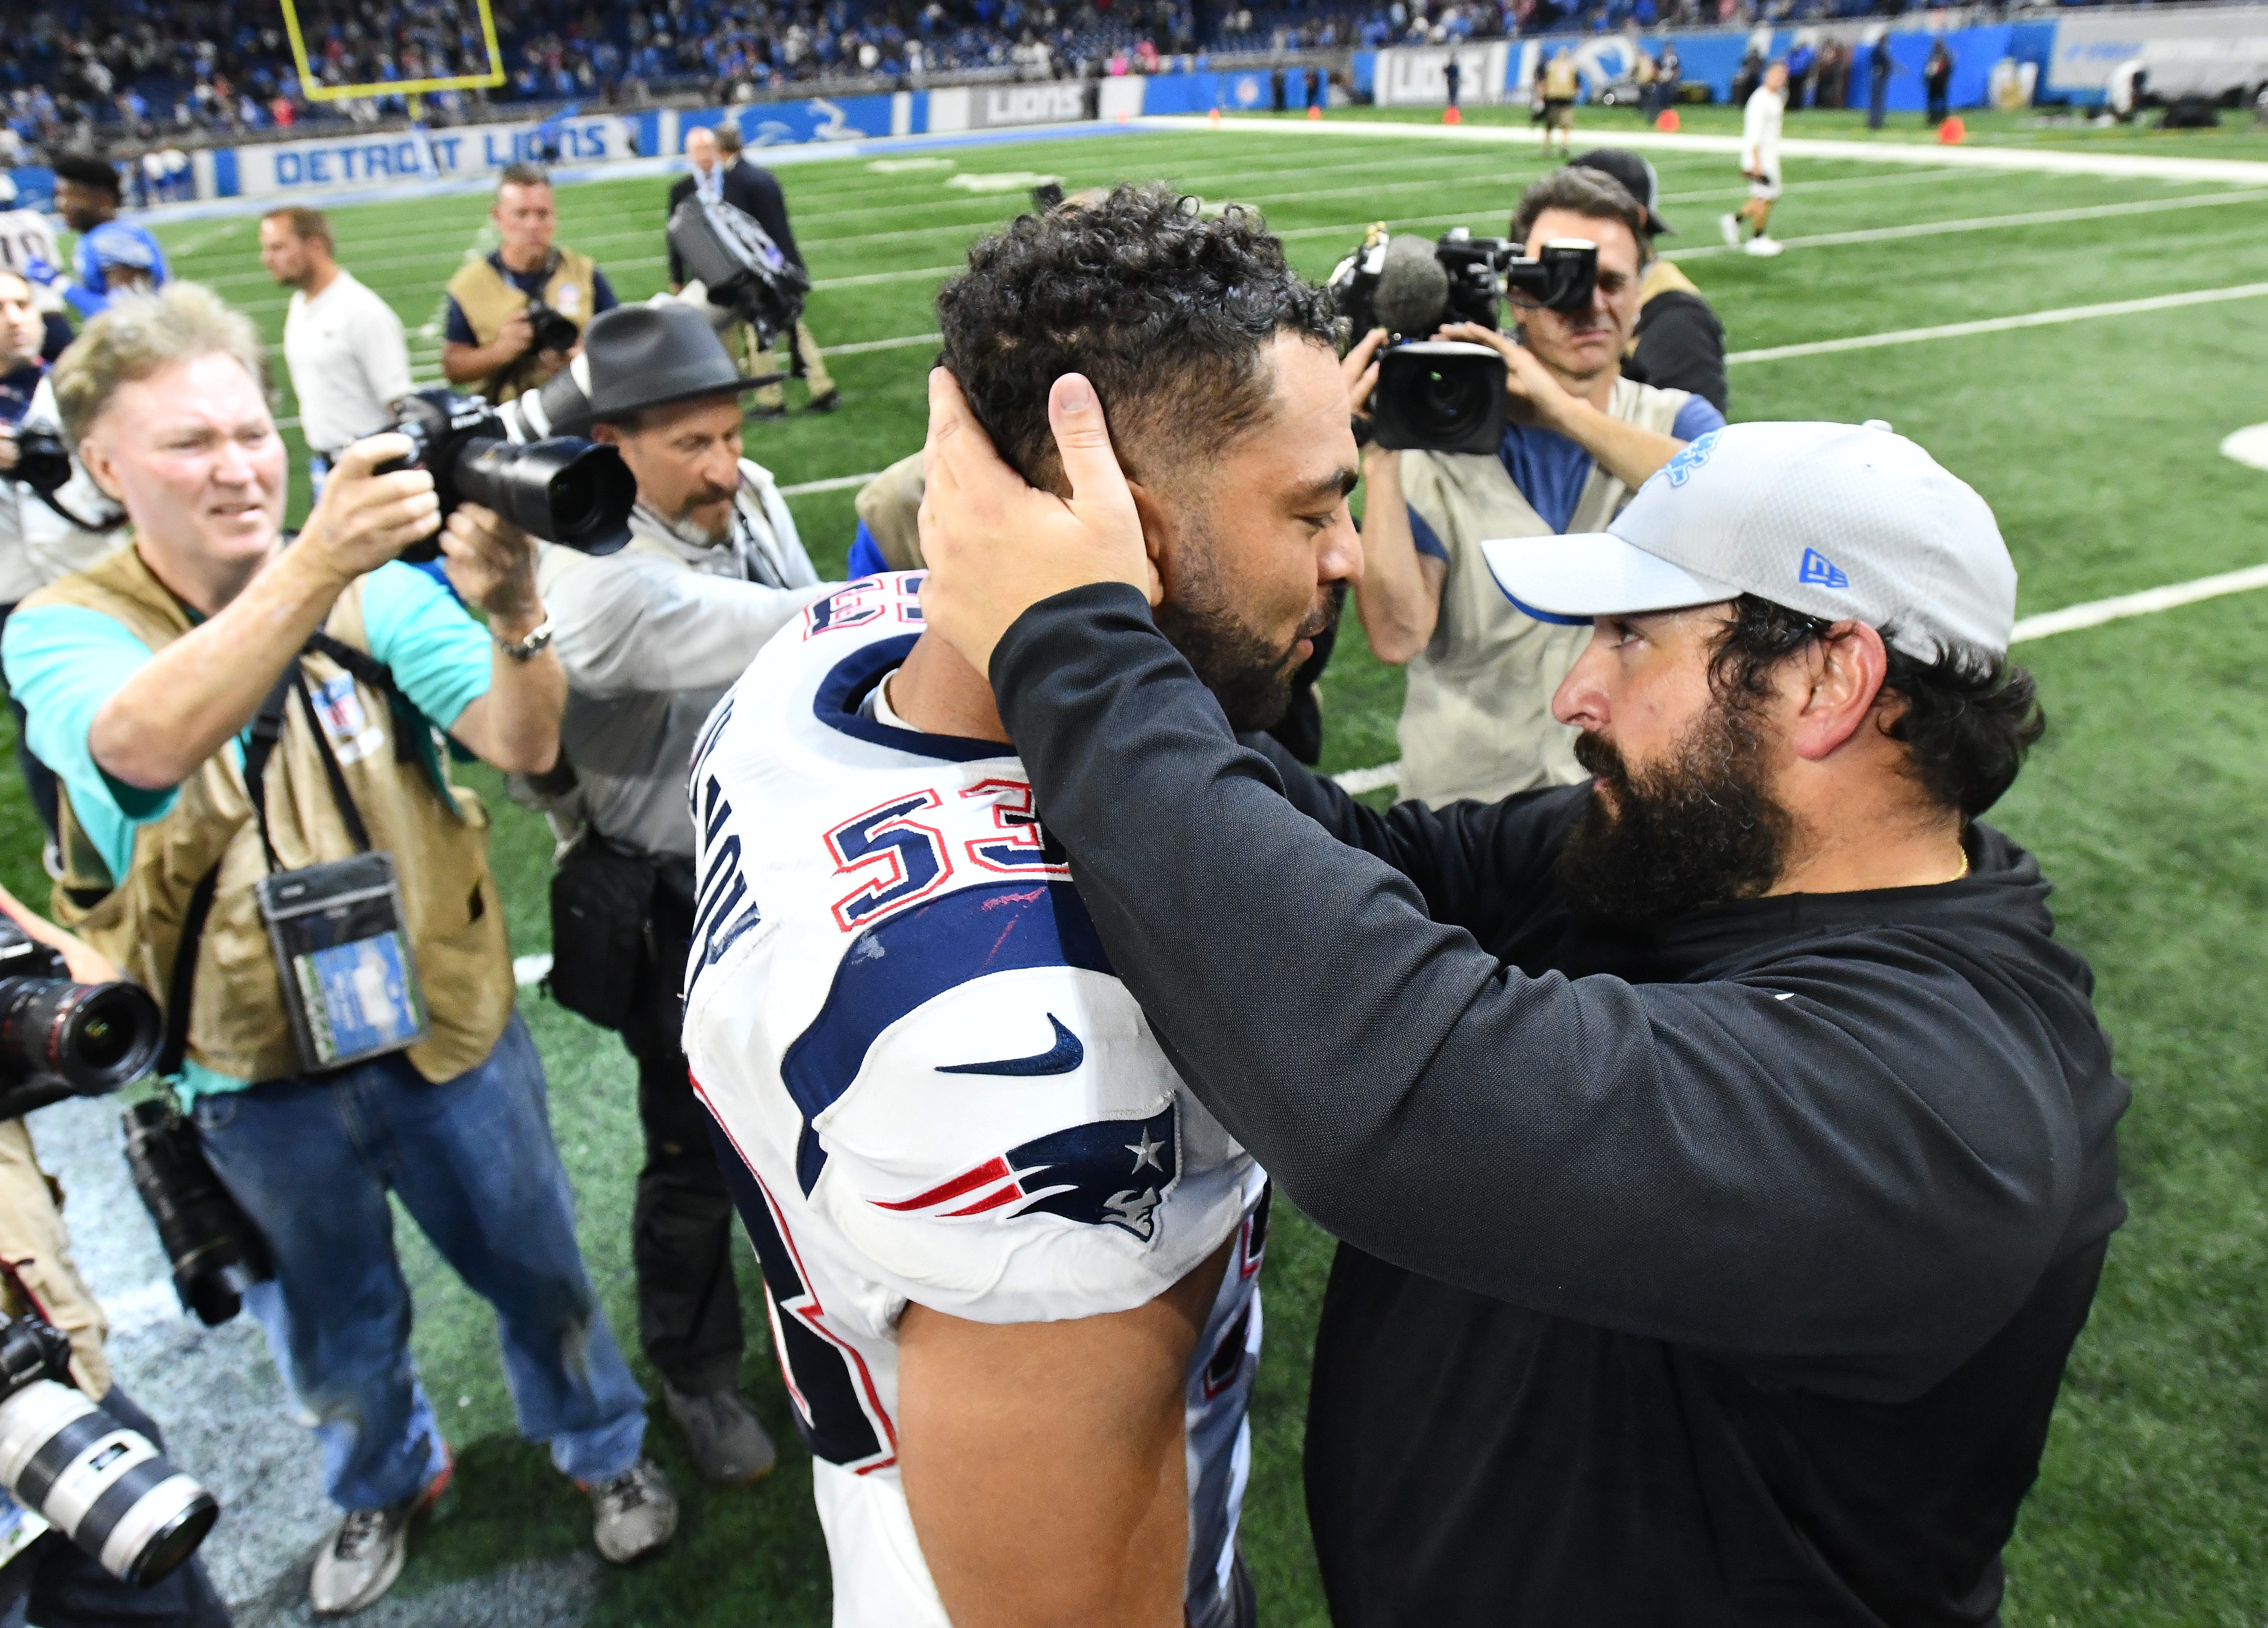 Former Detroit Lion Kyle Van Noy hugs his former New England coach, now head coach with the Lions, Matt Patricia after the Detroit victory.